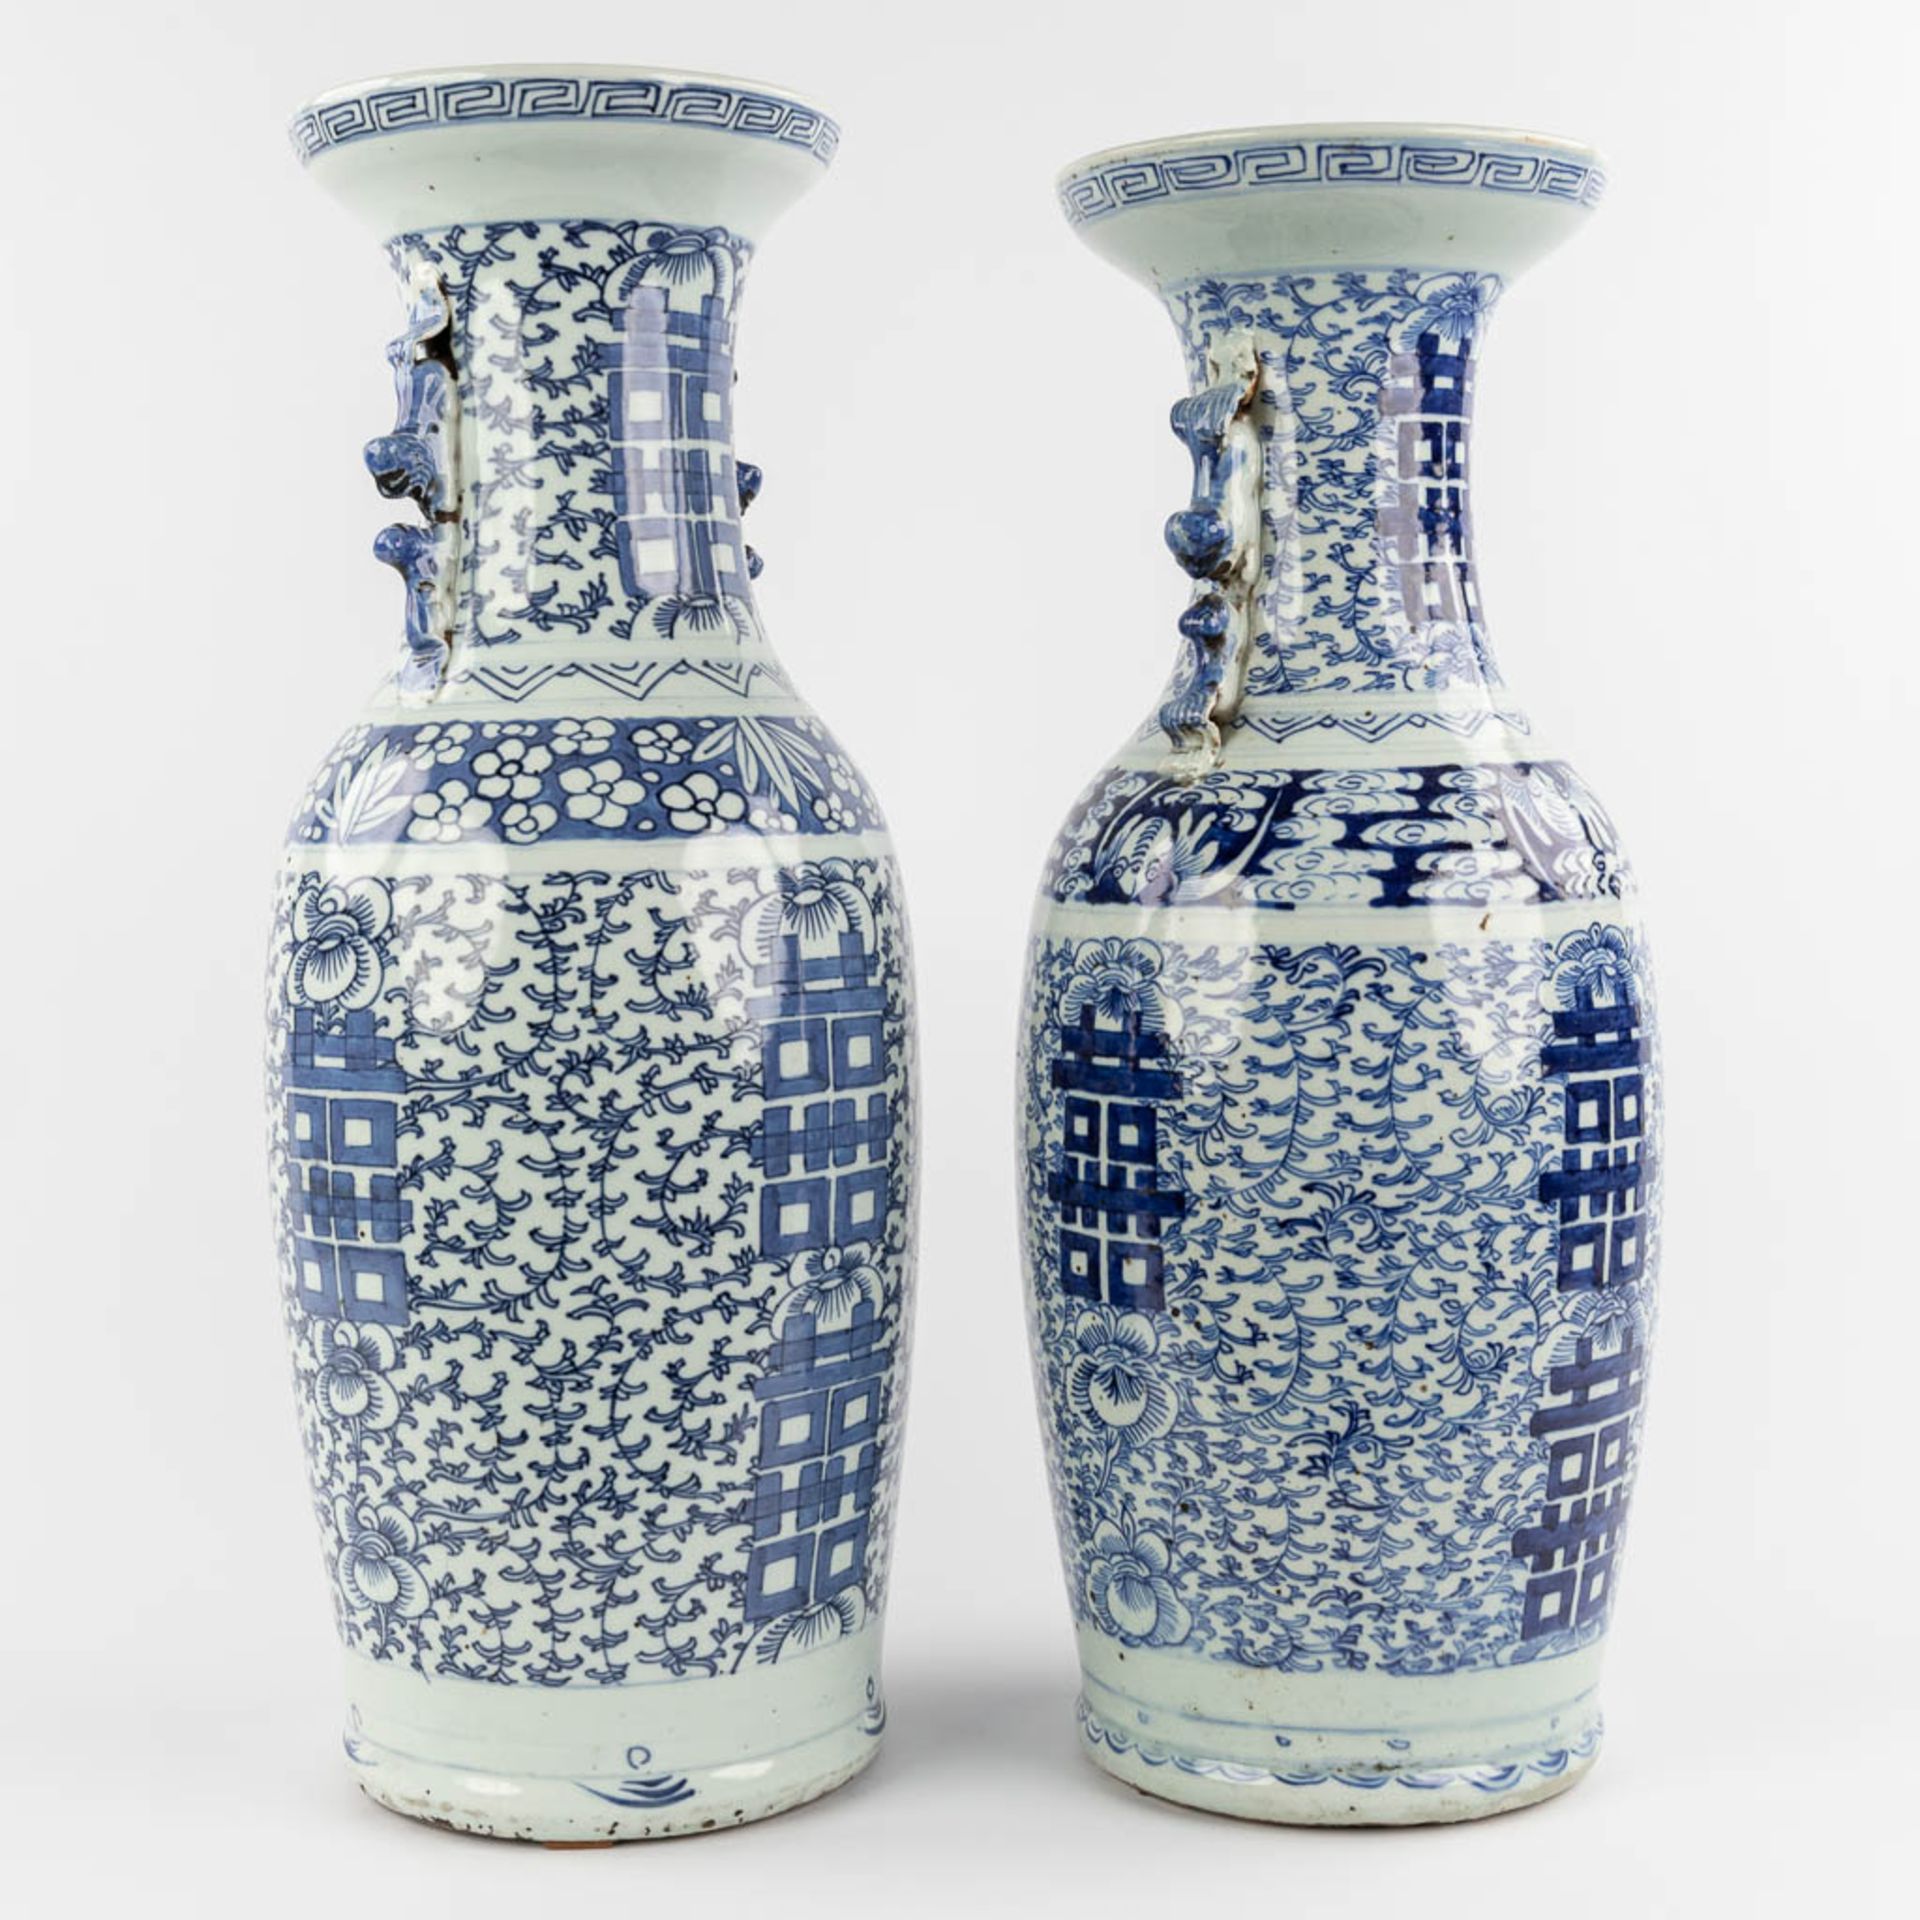 Two Chinese vases with blue-white double xi-sign of happiness. 19th/20th C. (H:60 x D:21 cm) - Image 3 of 12